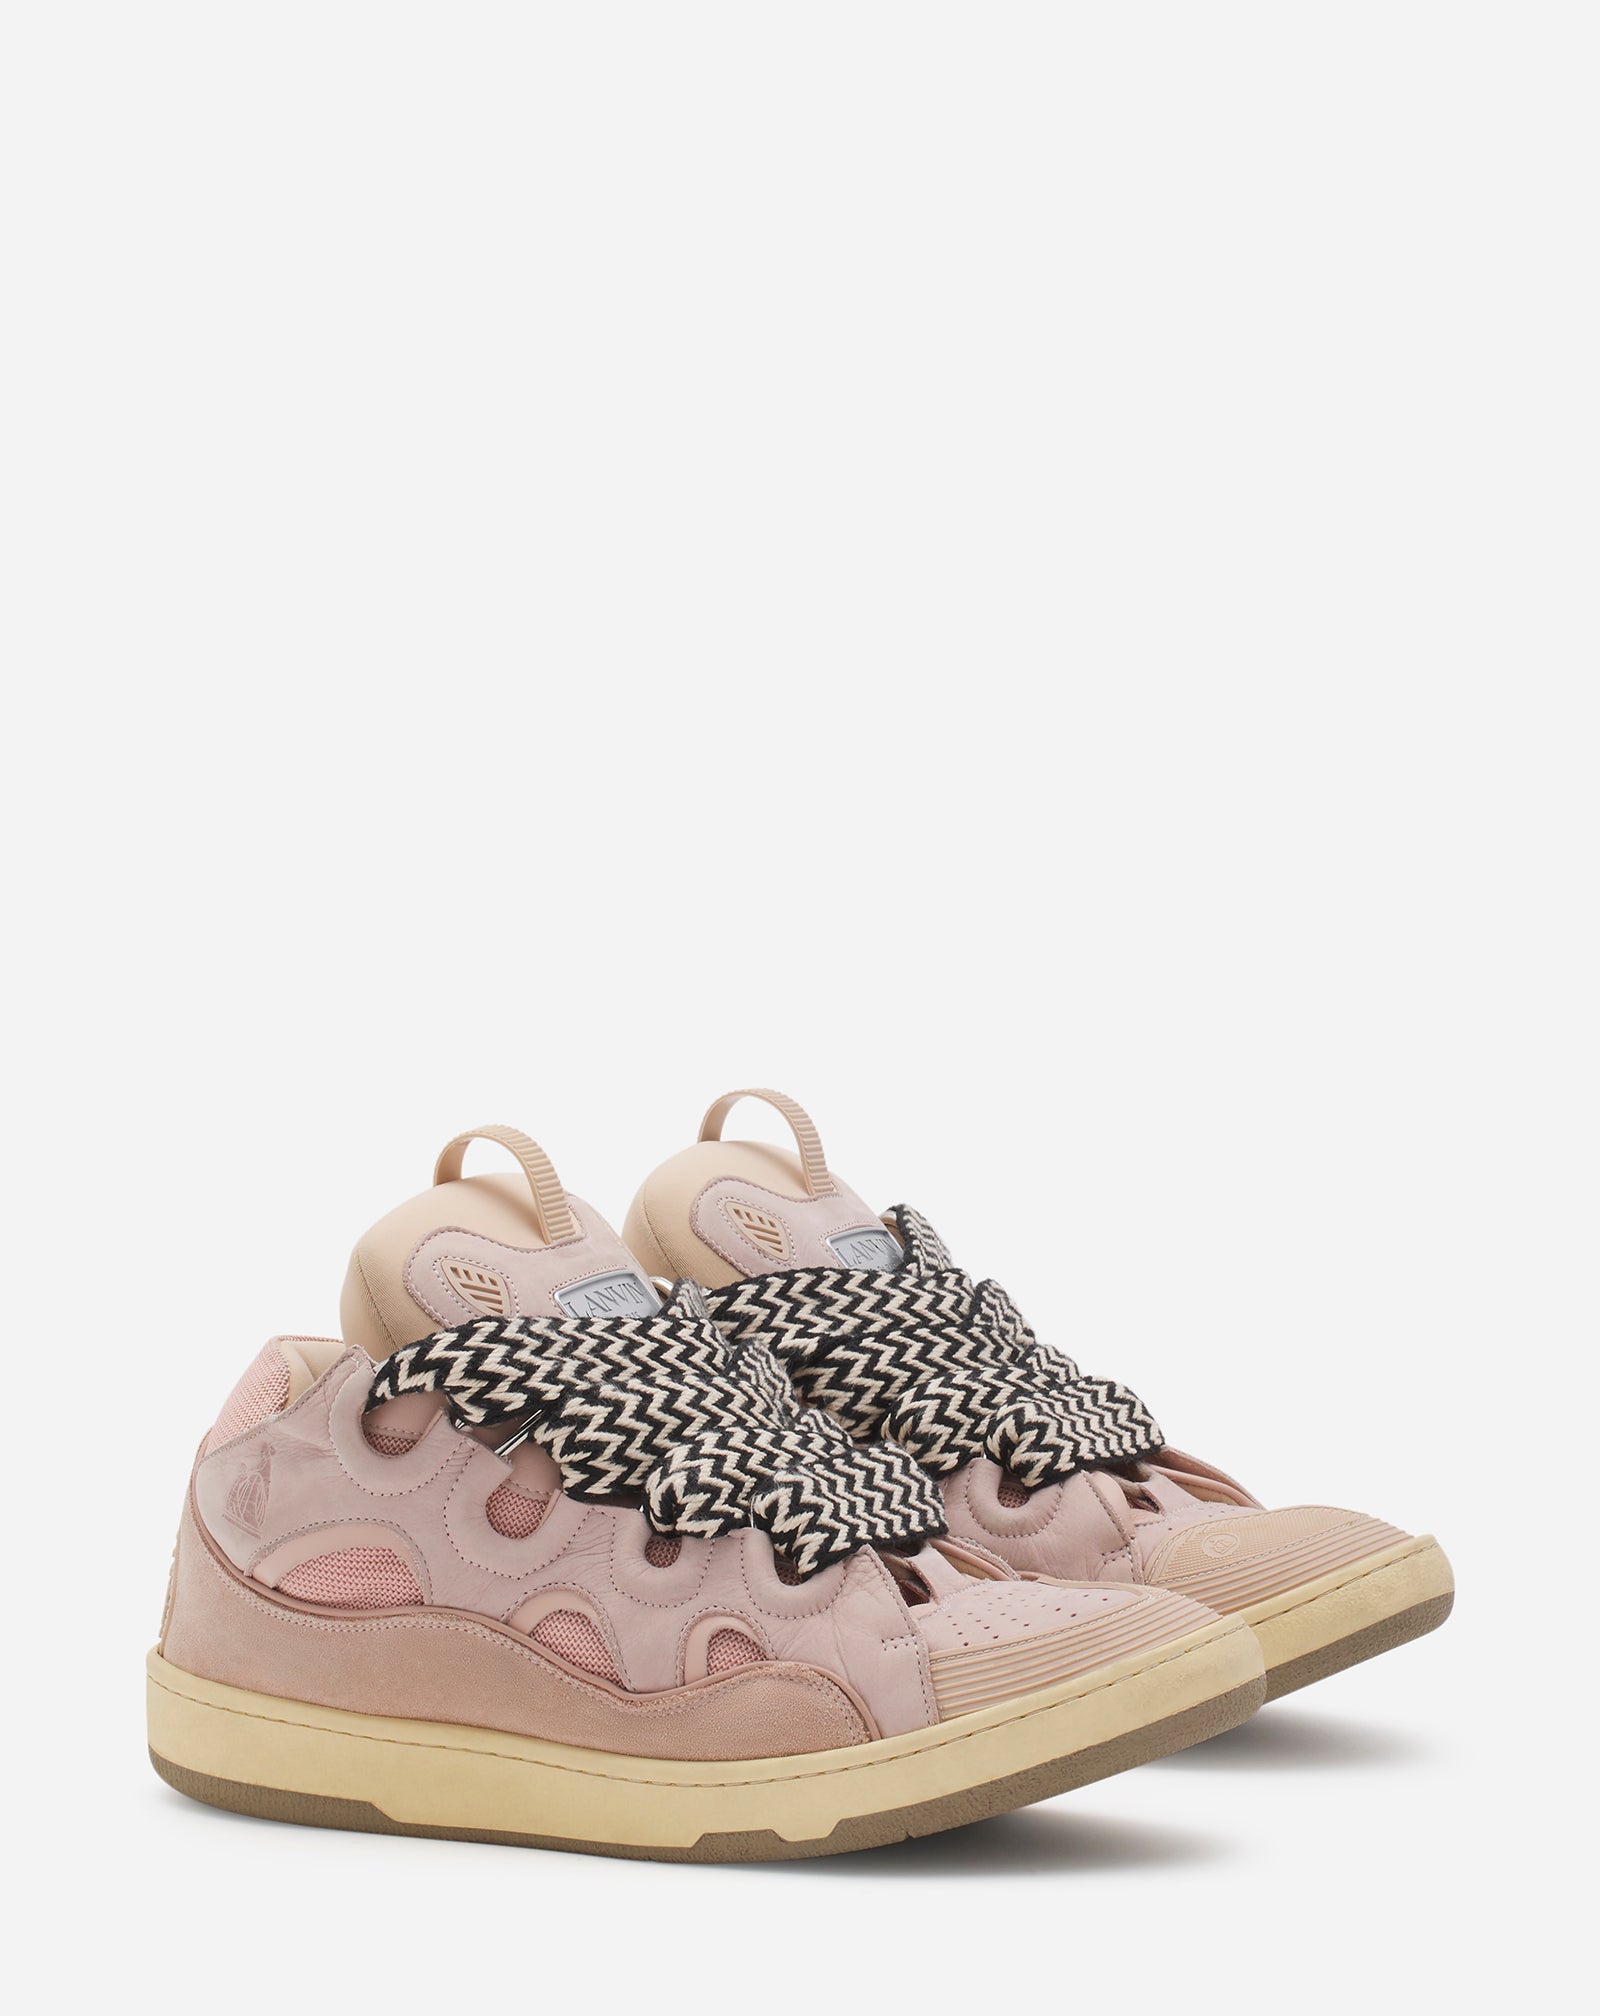 LEATHER CURB SNEAKERS PINK | Lanvin – LANVIN